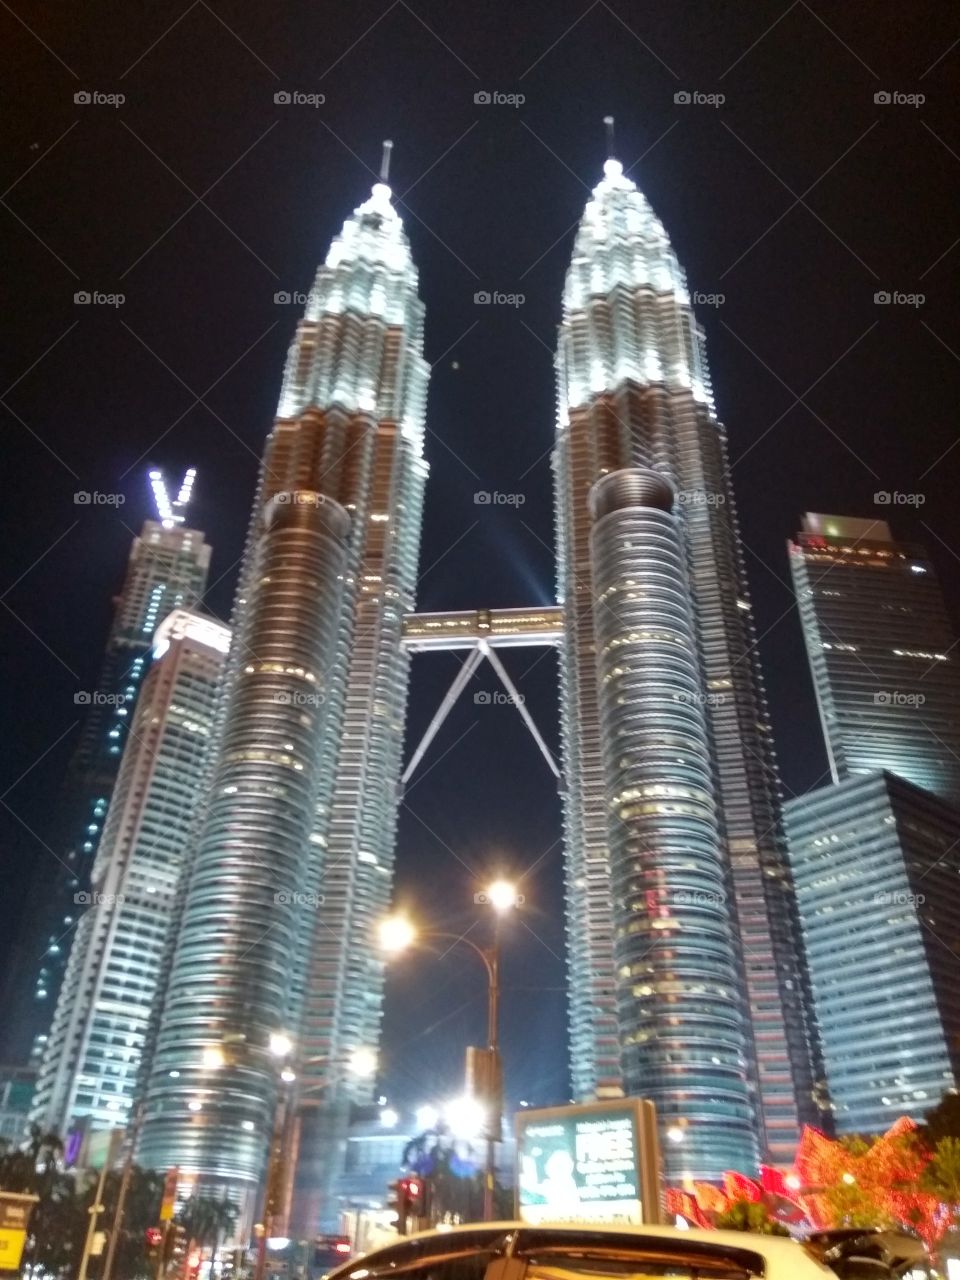 KLCC at night.. Awesome view